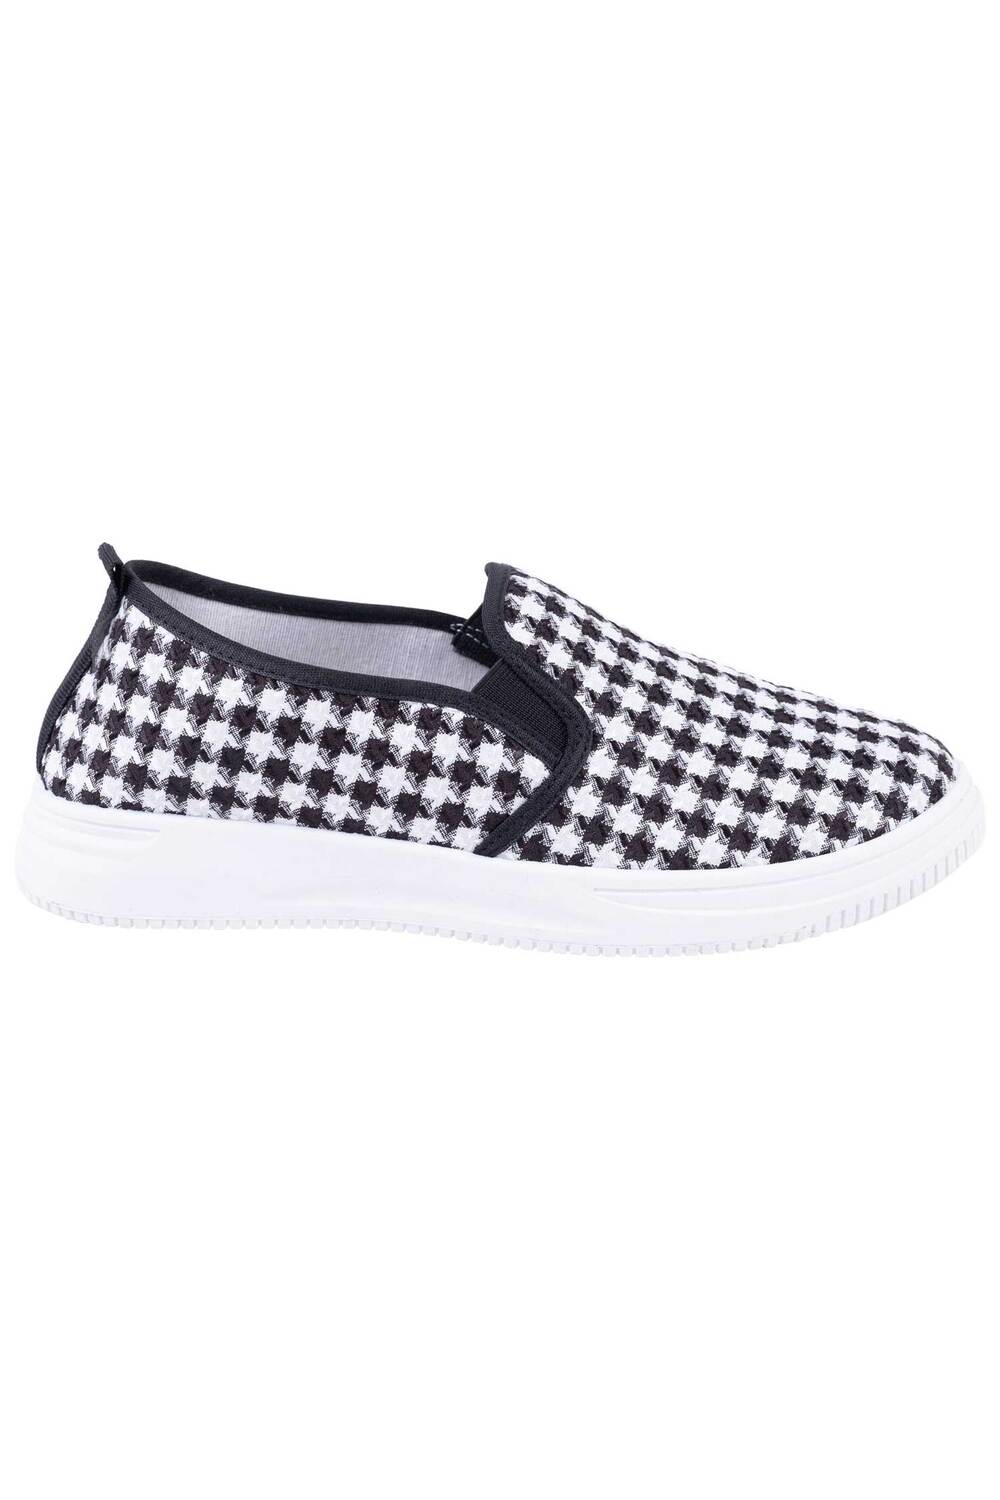 Women's low-top canvas slip-on sneakers, Houndstooth